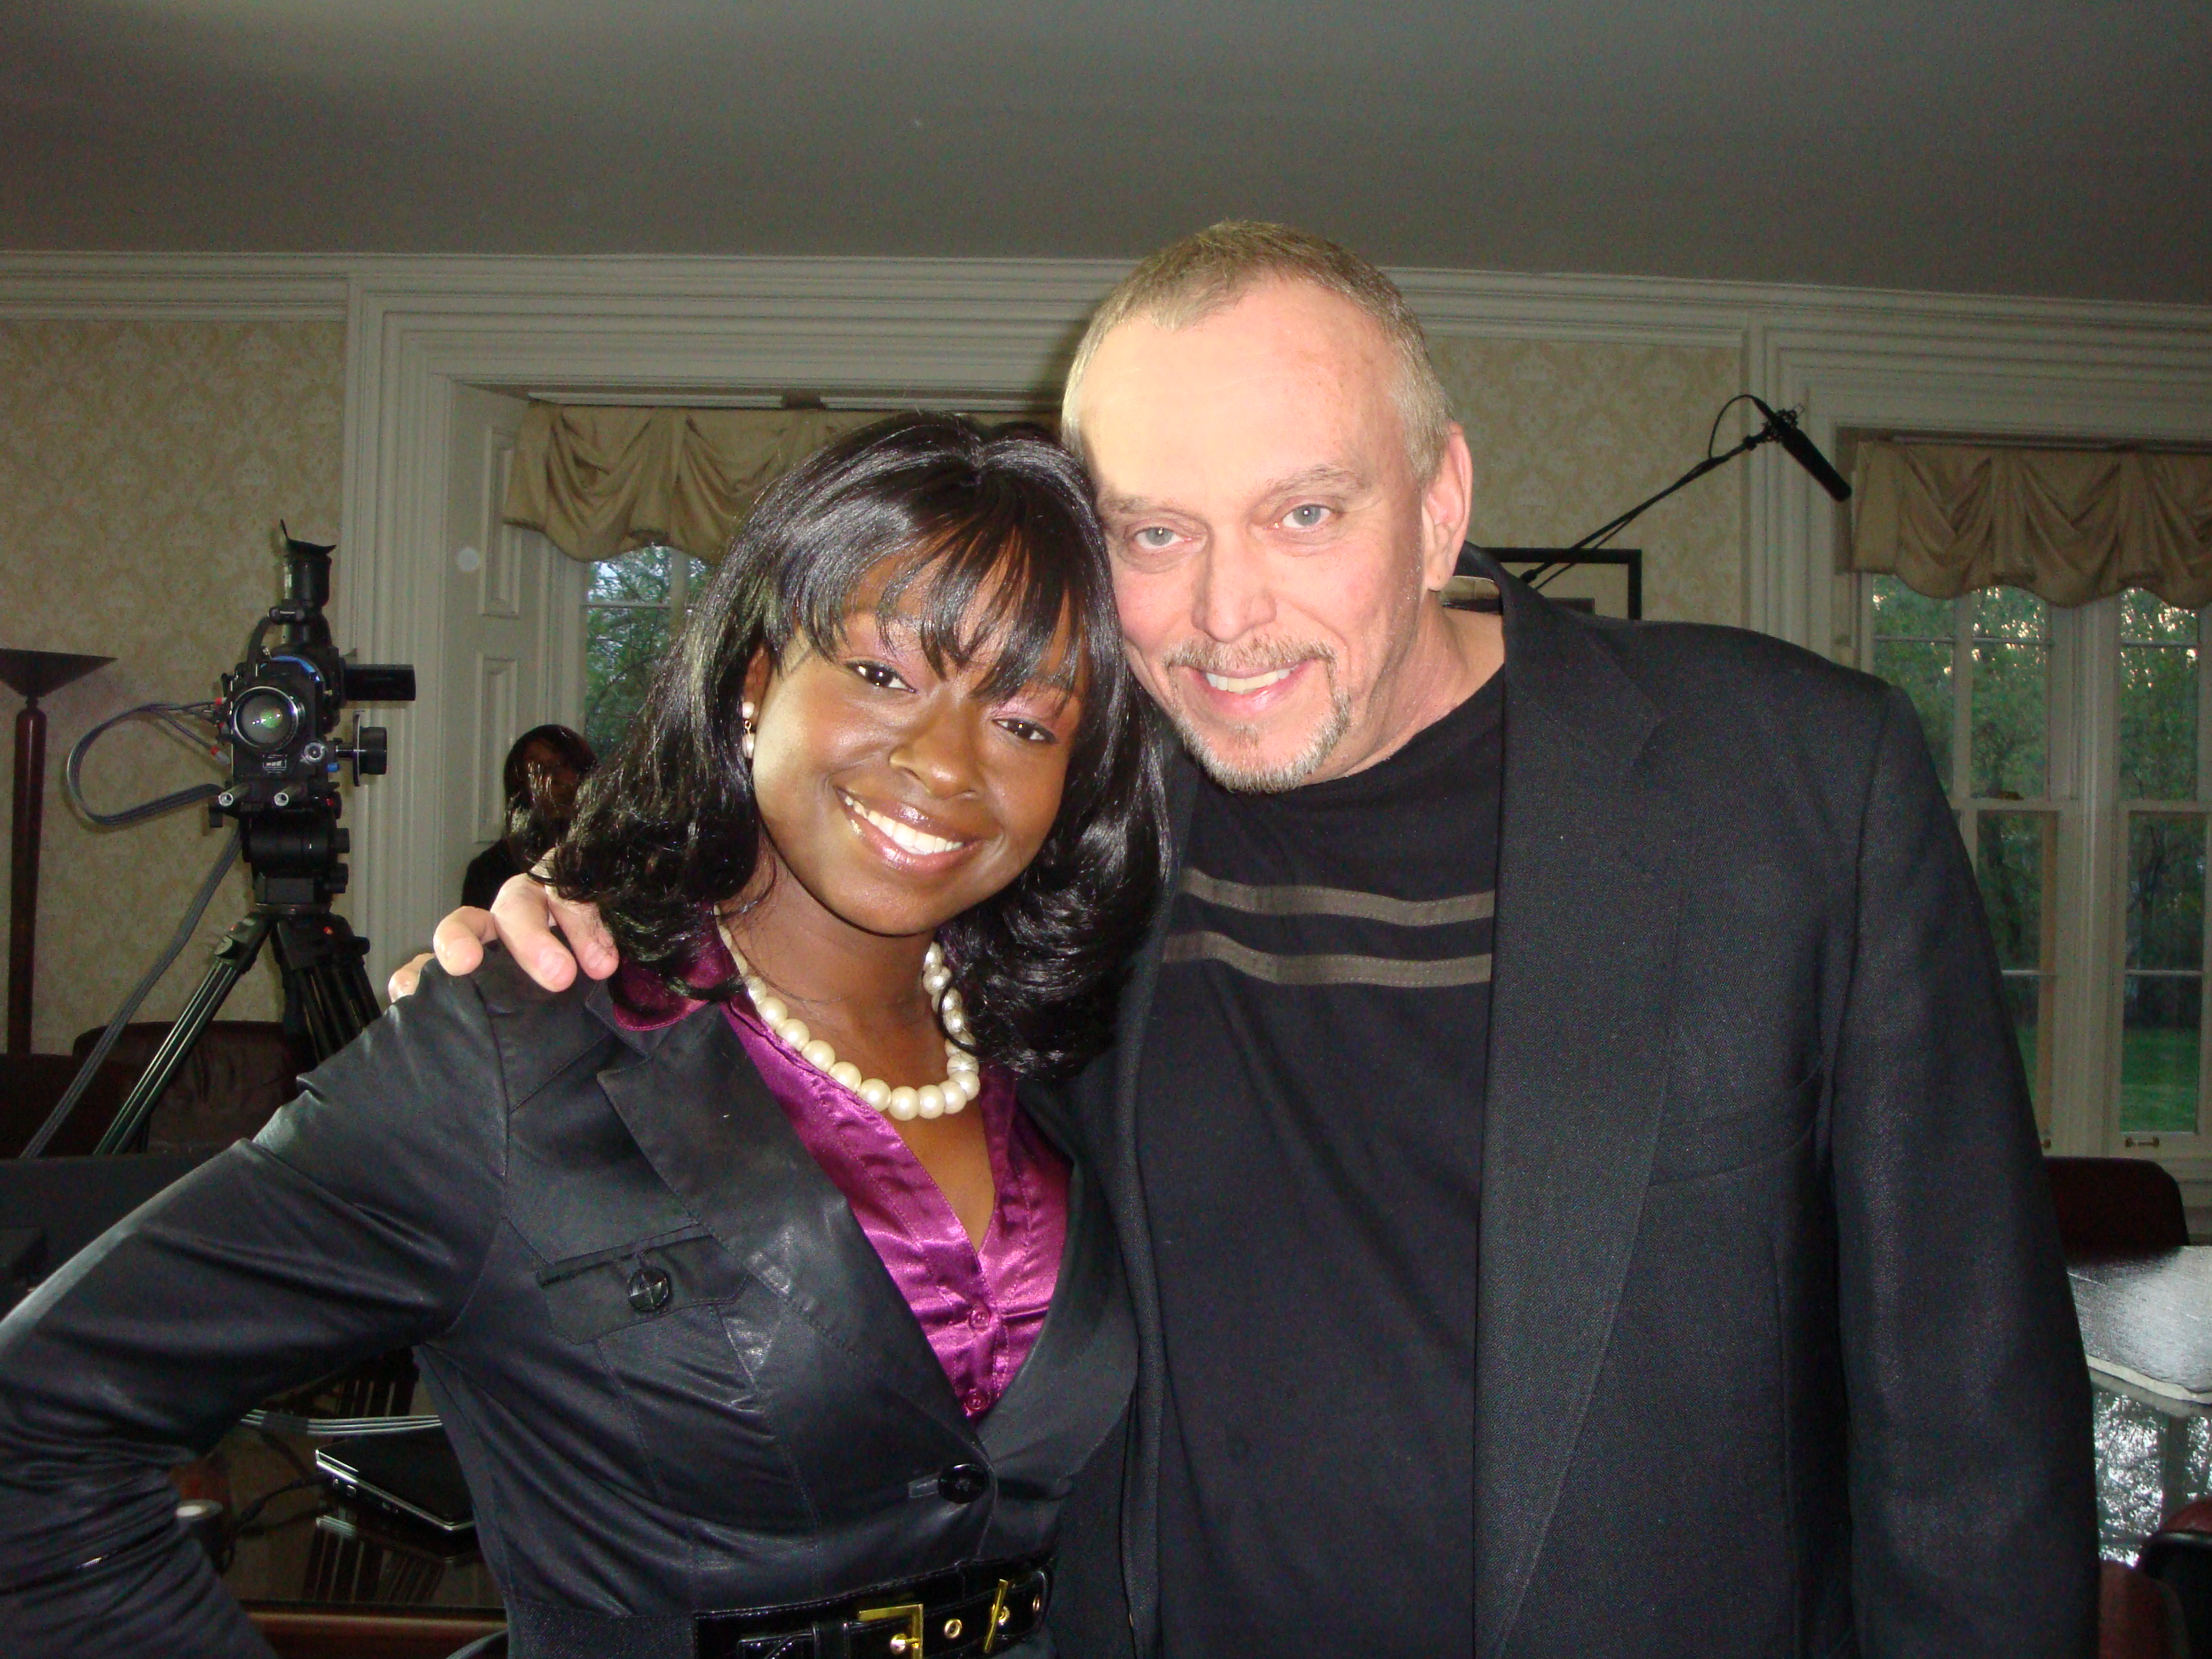 Actress Rae'Ven Larrymore-Kelly (A Time to Kill, Ghosts of Mississippi, Hannah Montana) with actor-director Anthony Hornus (Miracle at Sage Creek, A State of Hate) on the Detroit set of the drama/thriller 